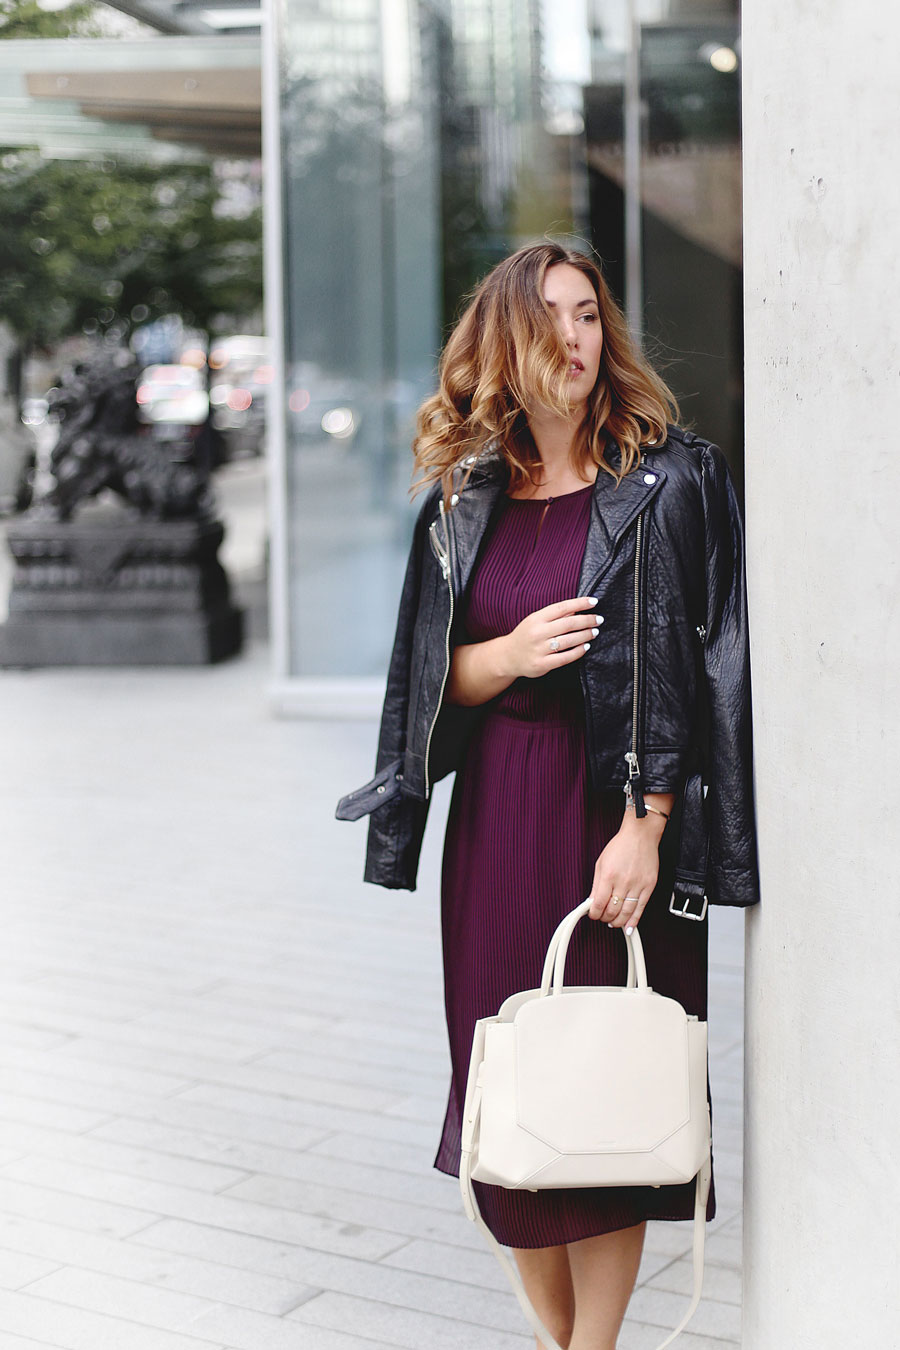 To Vogue or Bust shares details about the Aritzia warehouse sale 2016 in a Wilfred silk pleated dress, Mackage Rumer leather jacket, Aritzia Auxiliary Bega bag and black pumps.